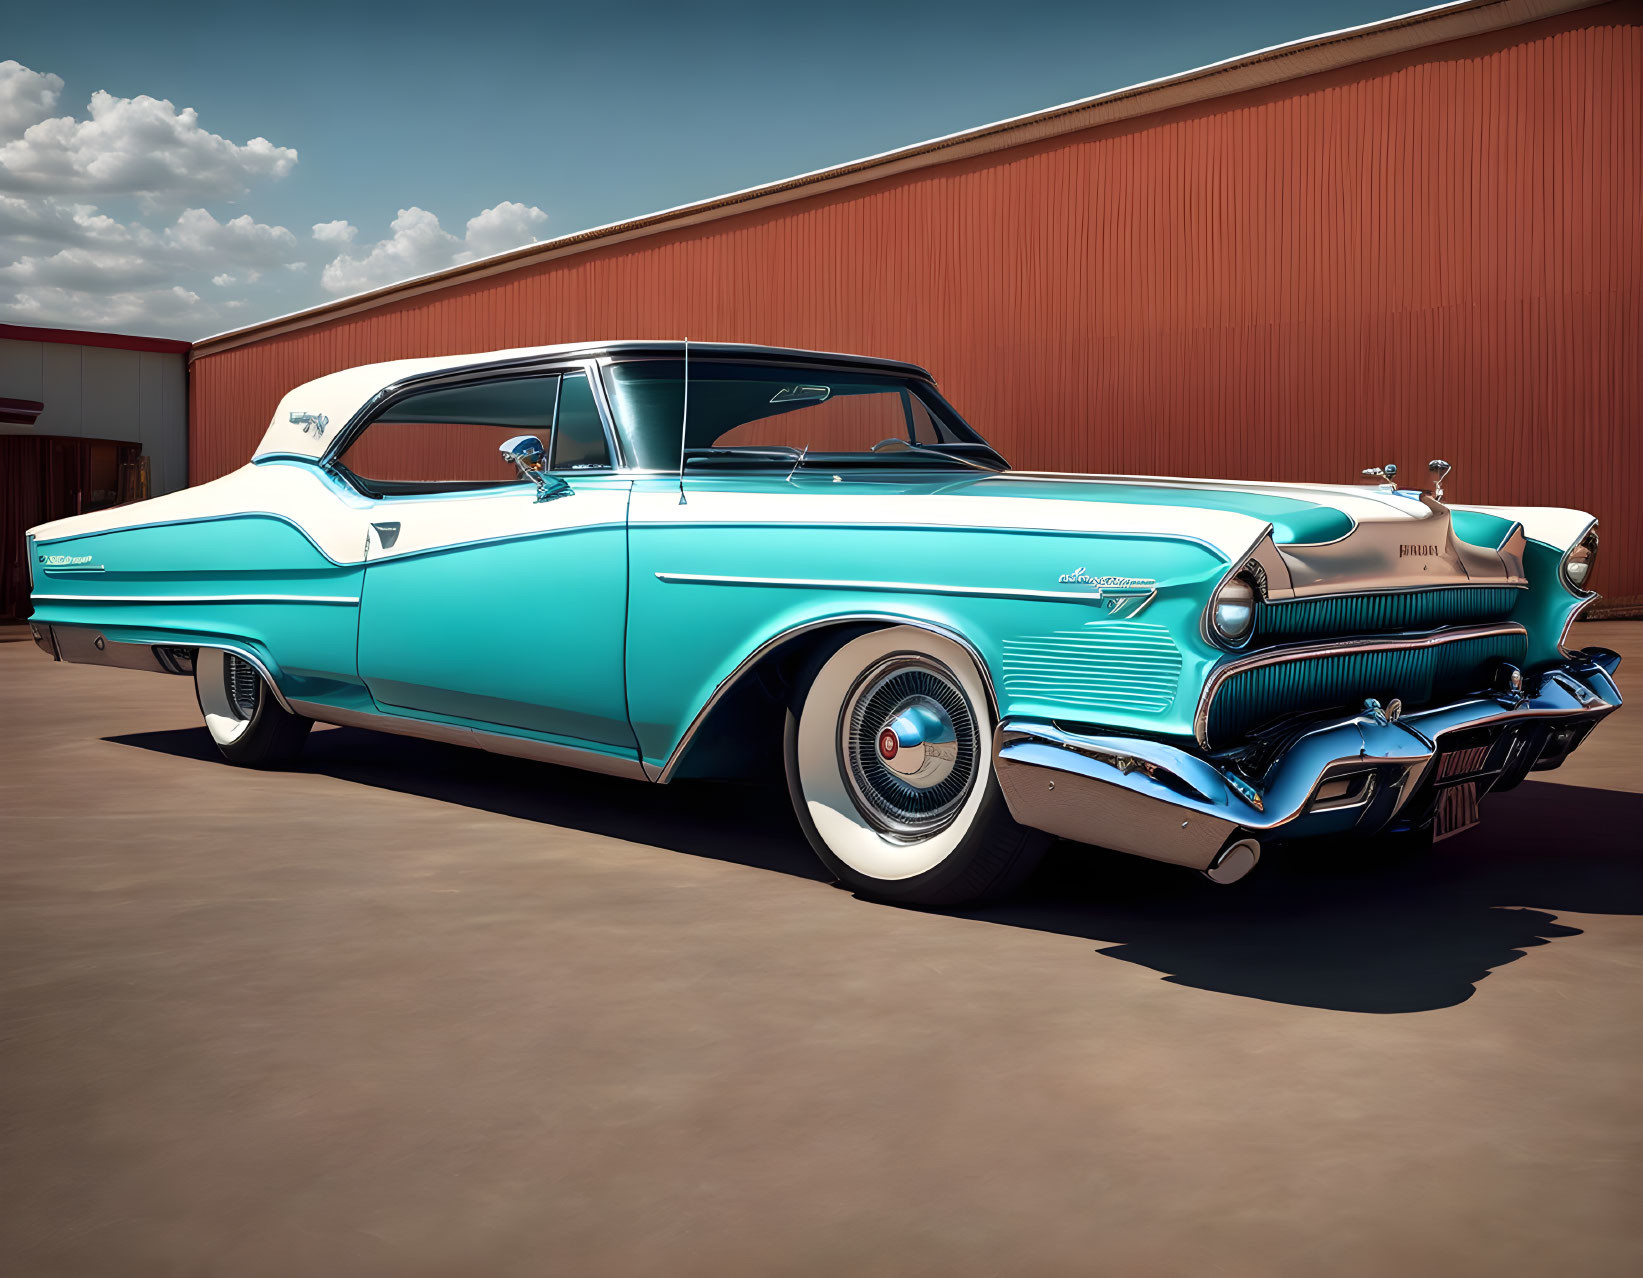 1957 Buick Special: Vintage Turquoise and White Car Parked Outside Red Building